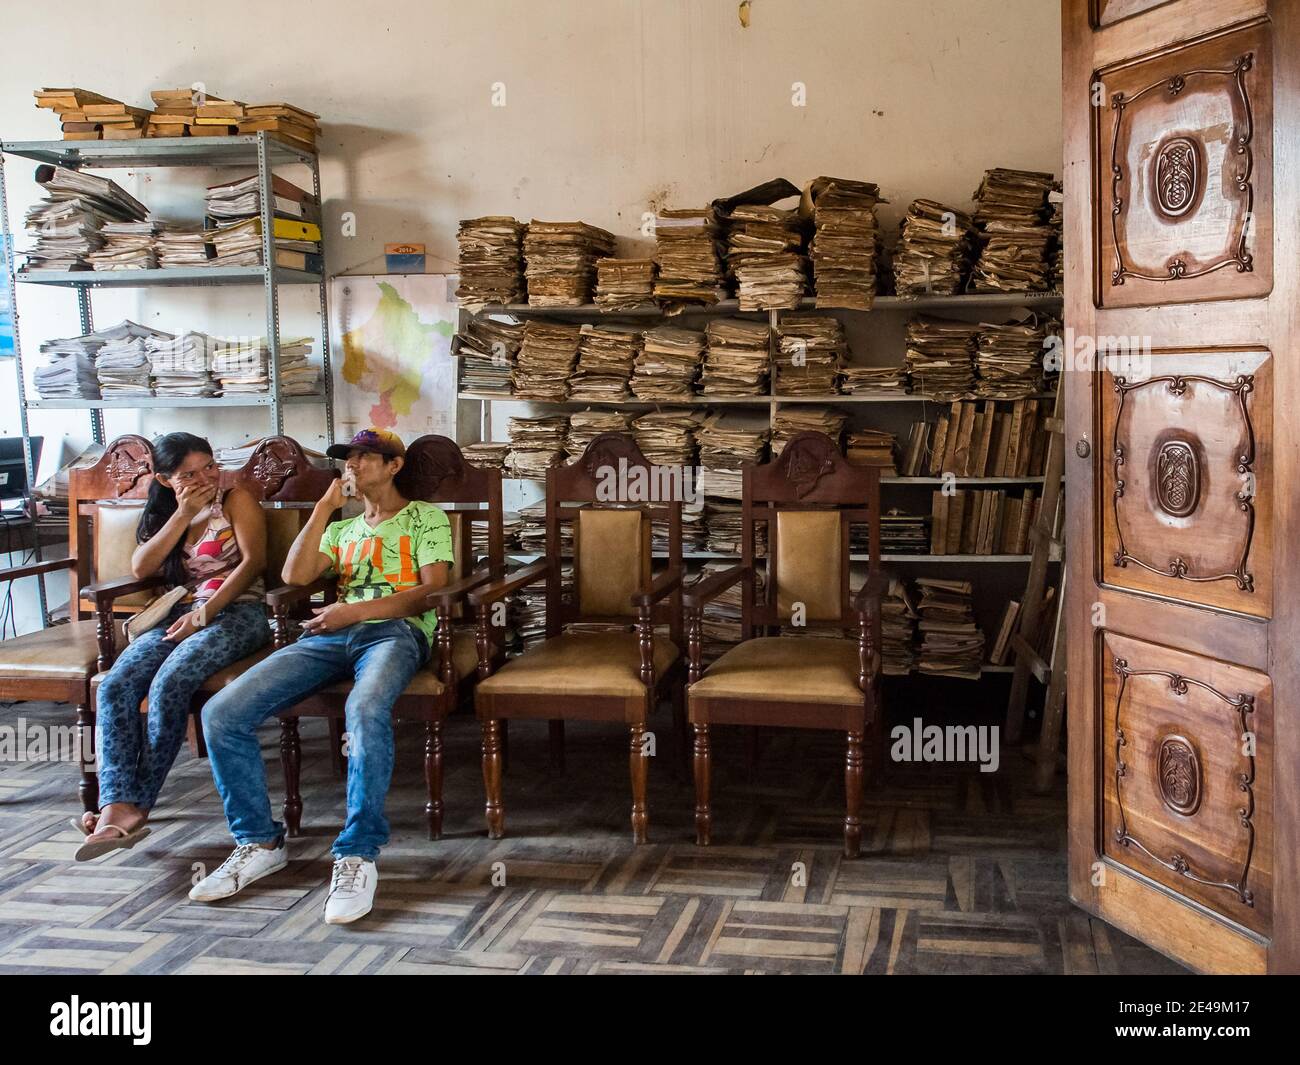 Iquitos, Peru, Dec 15, 2017: Old document files at the local history museum in Iquitos, Peru. 'Museo De Iquitos' South America. Ministry of Culture. A Stock Photo